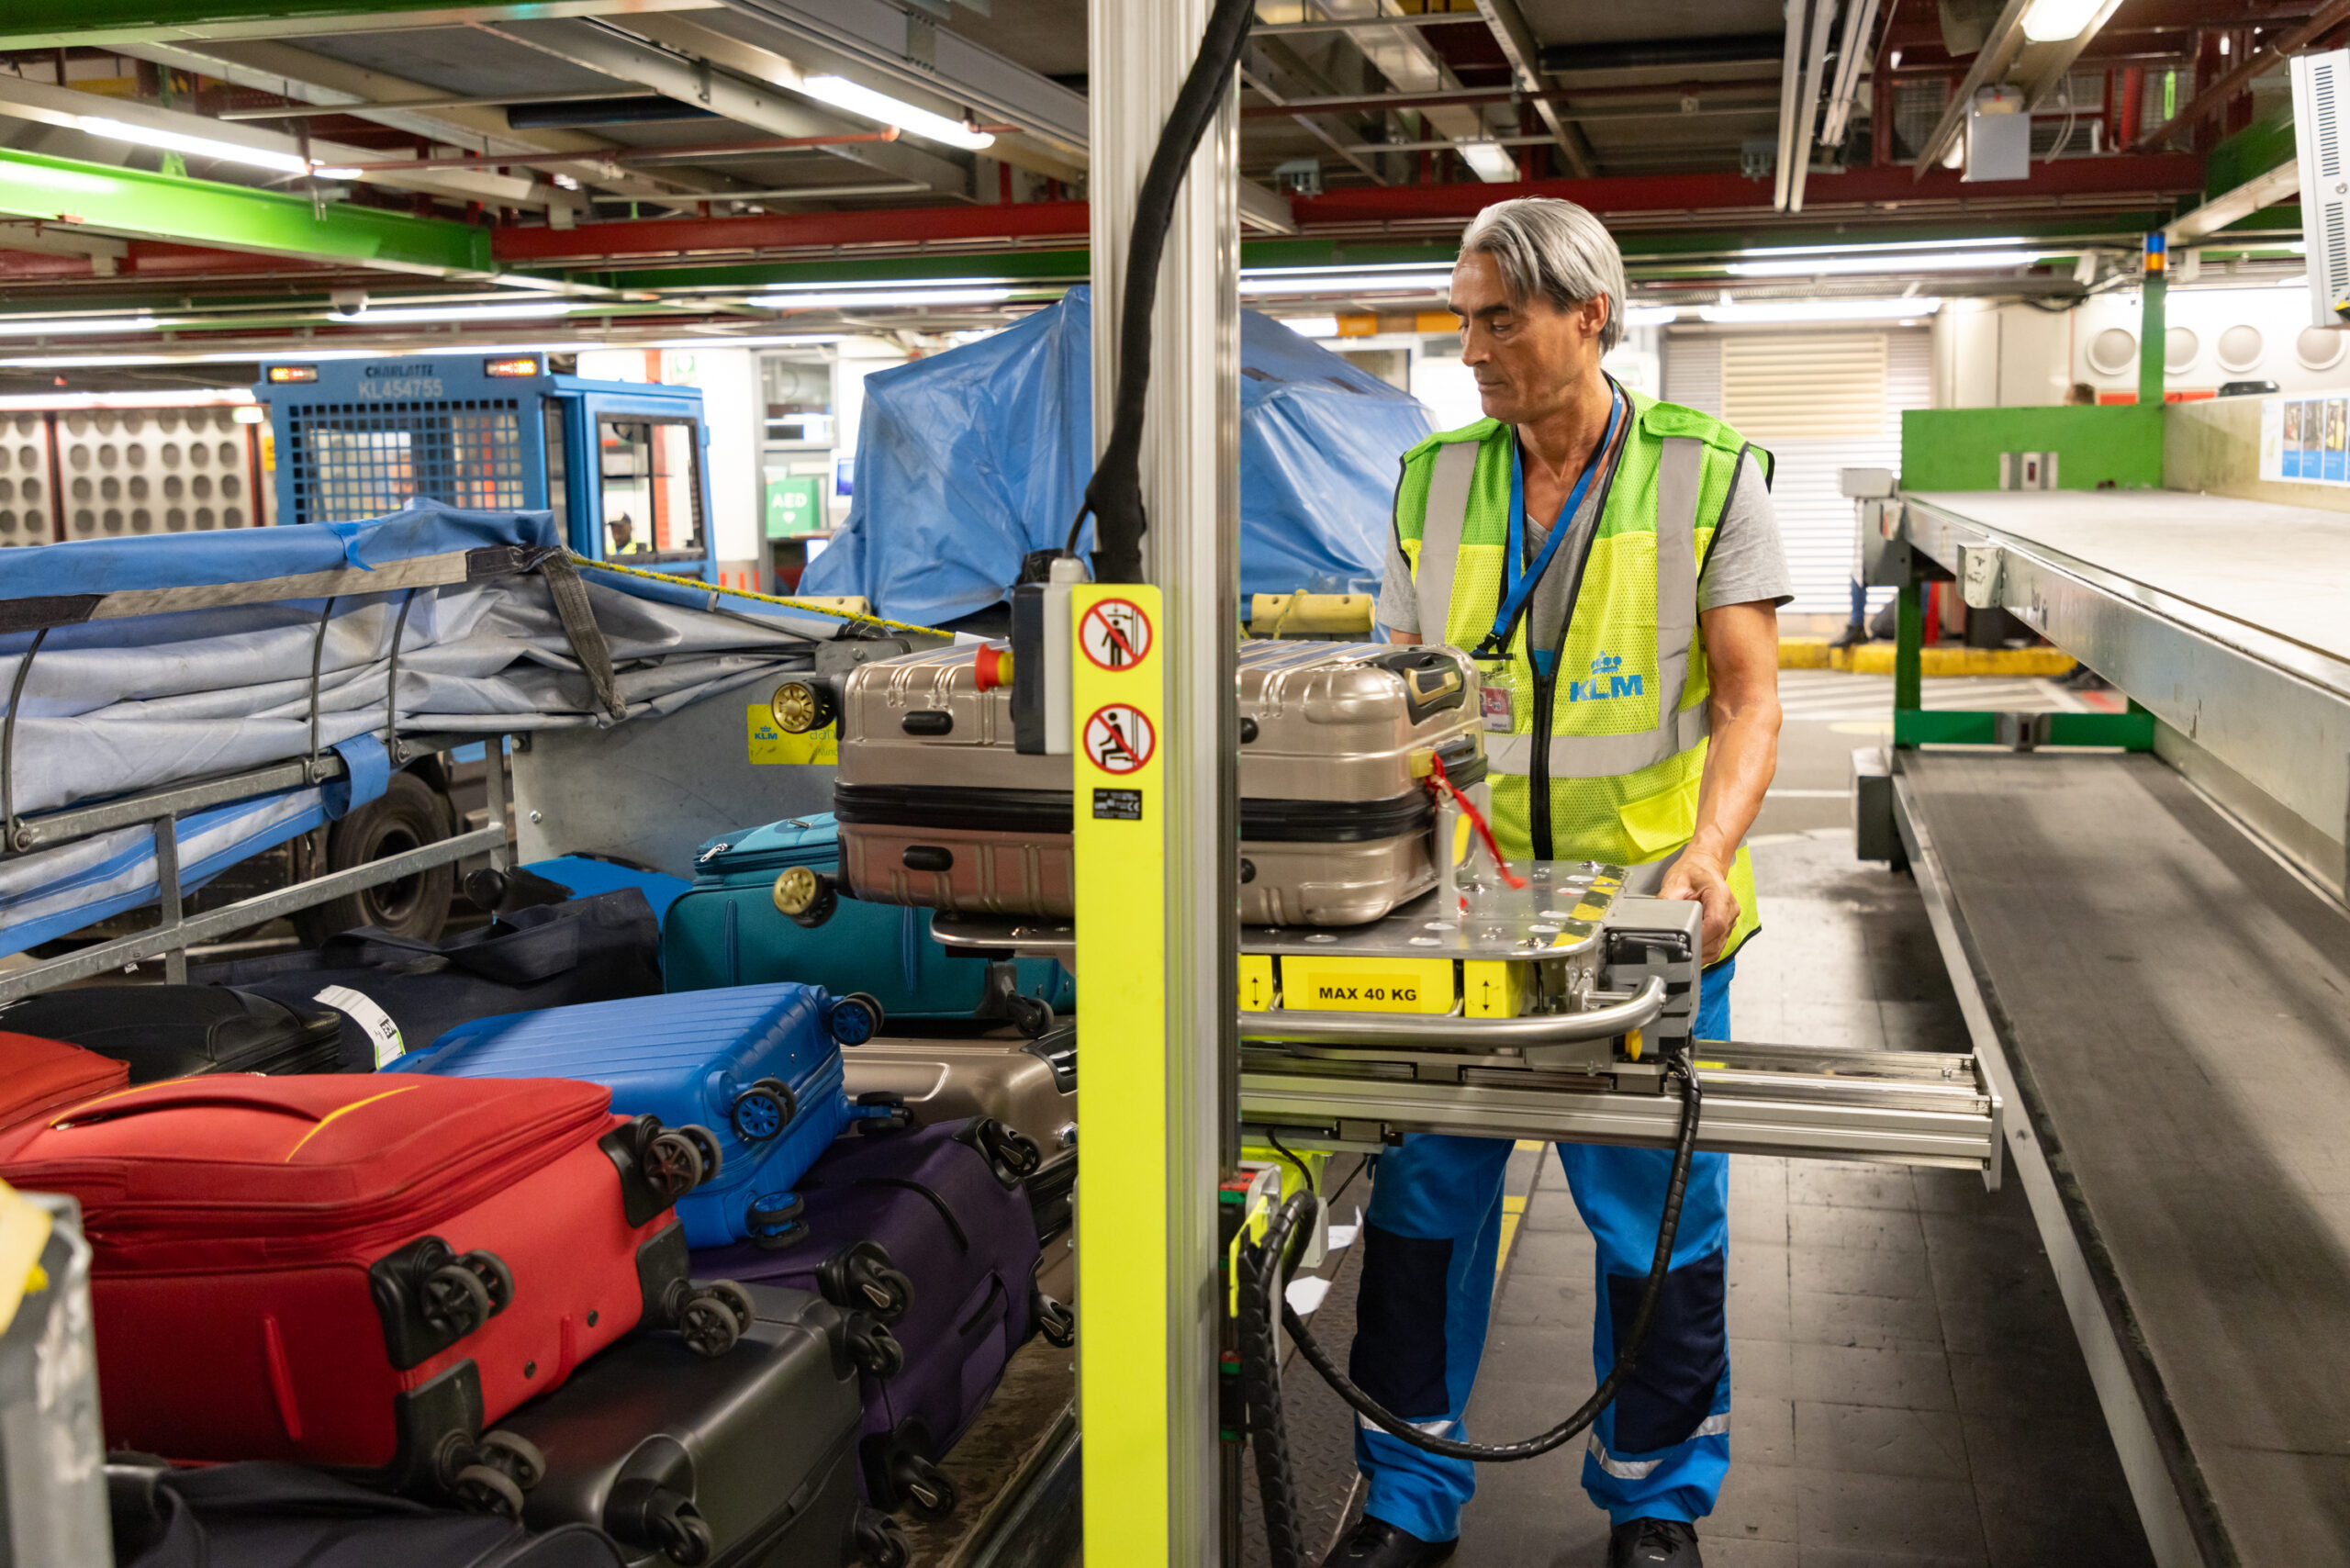 These tests contribute to the ambition to install a properly functioning lifting aid at every work location in the baggage halls by April 2024